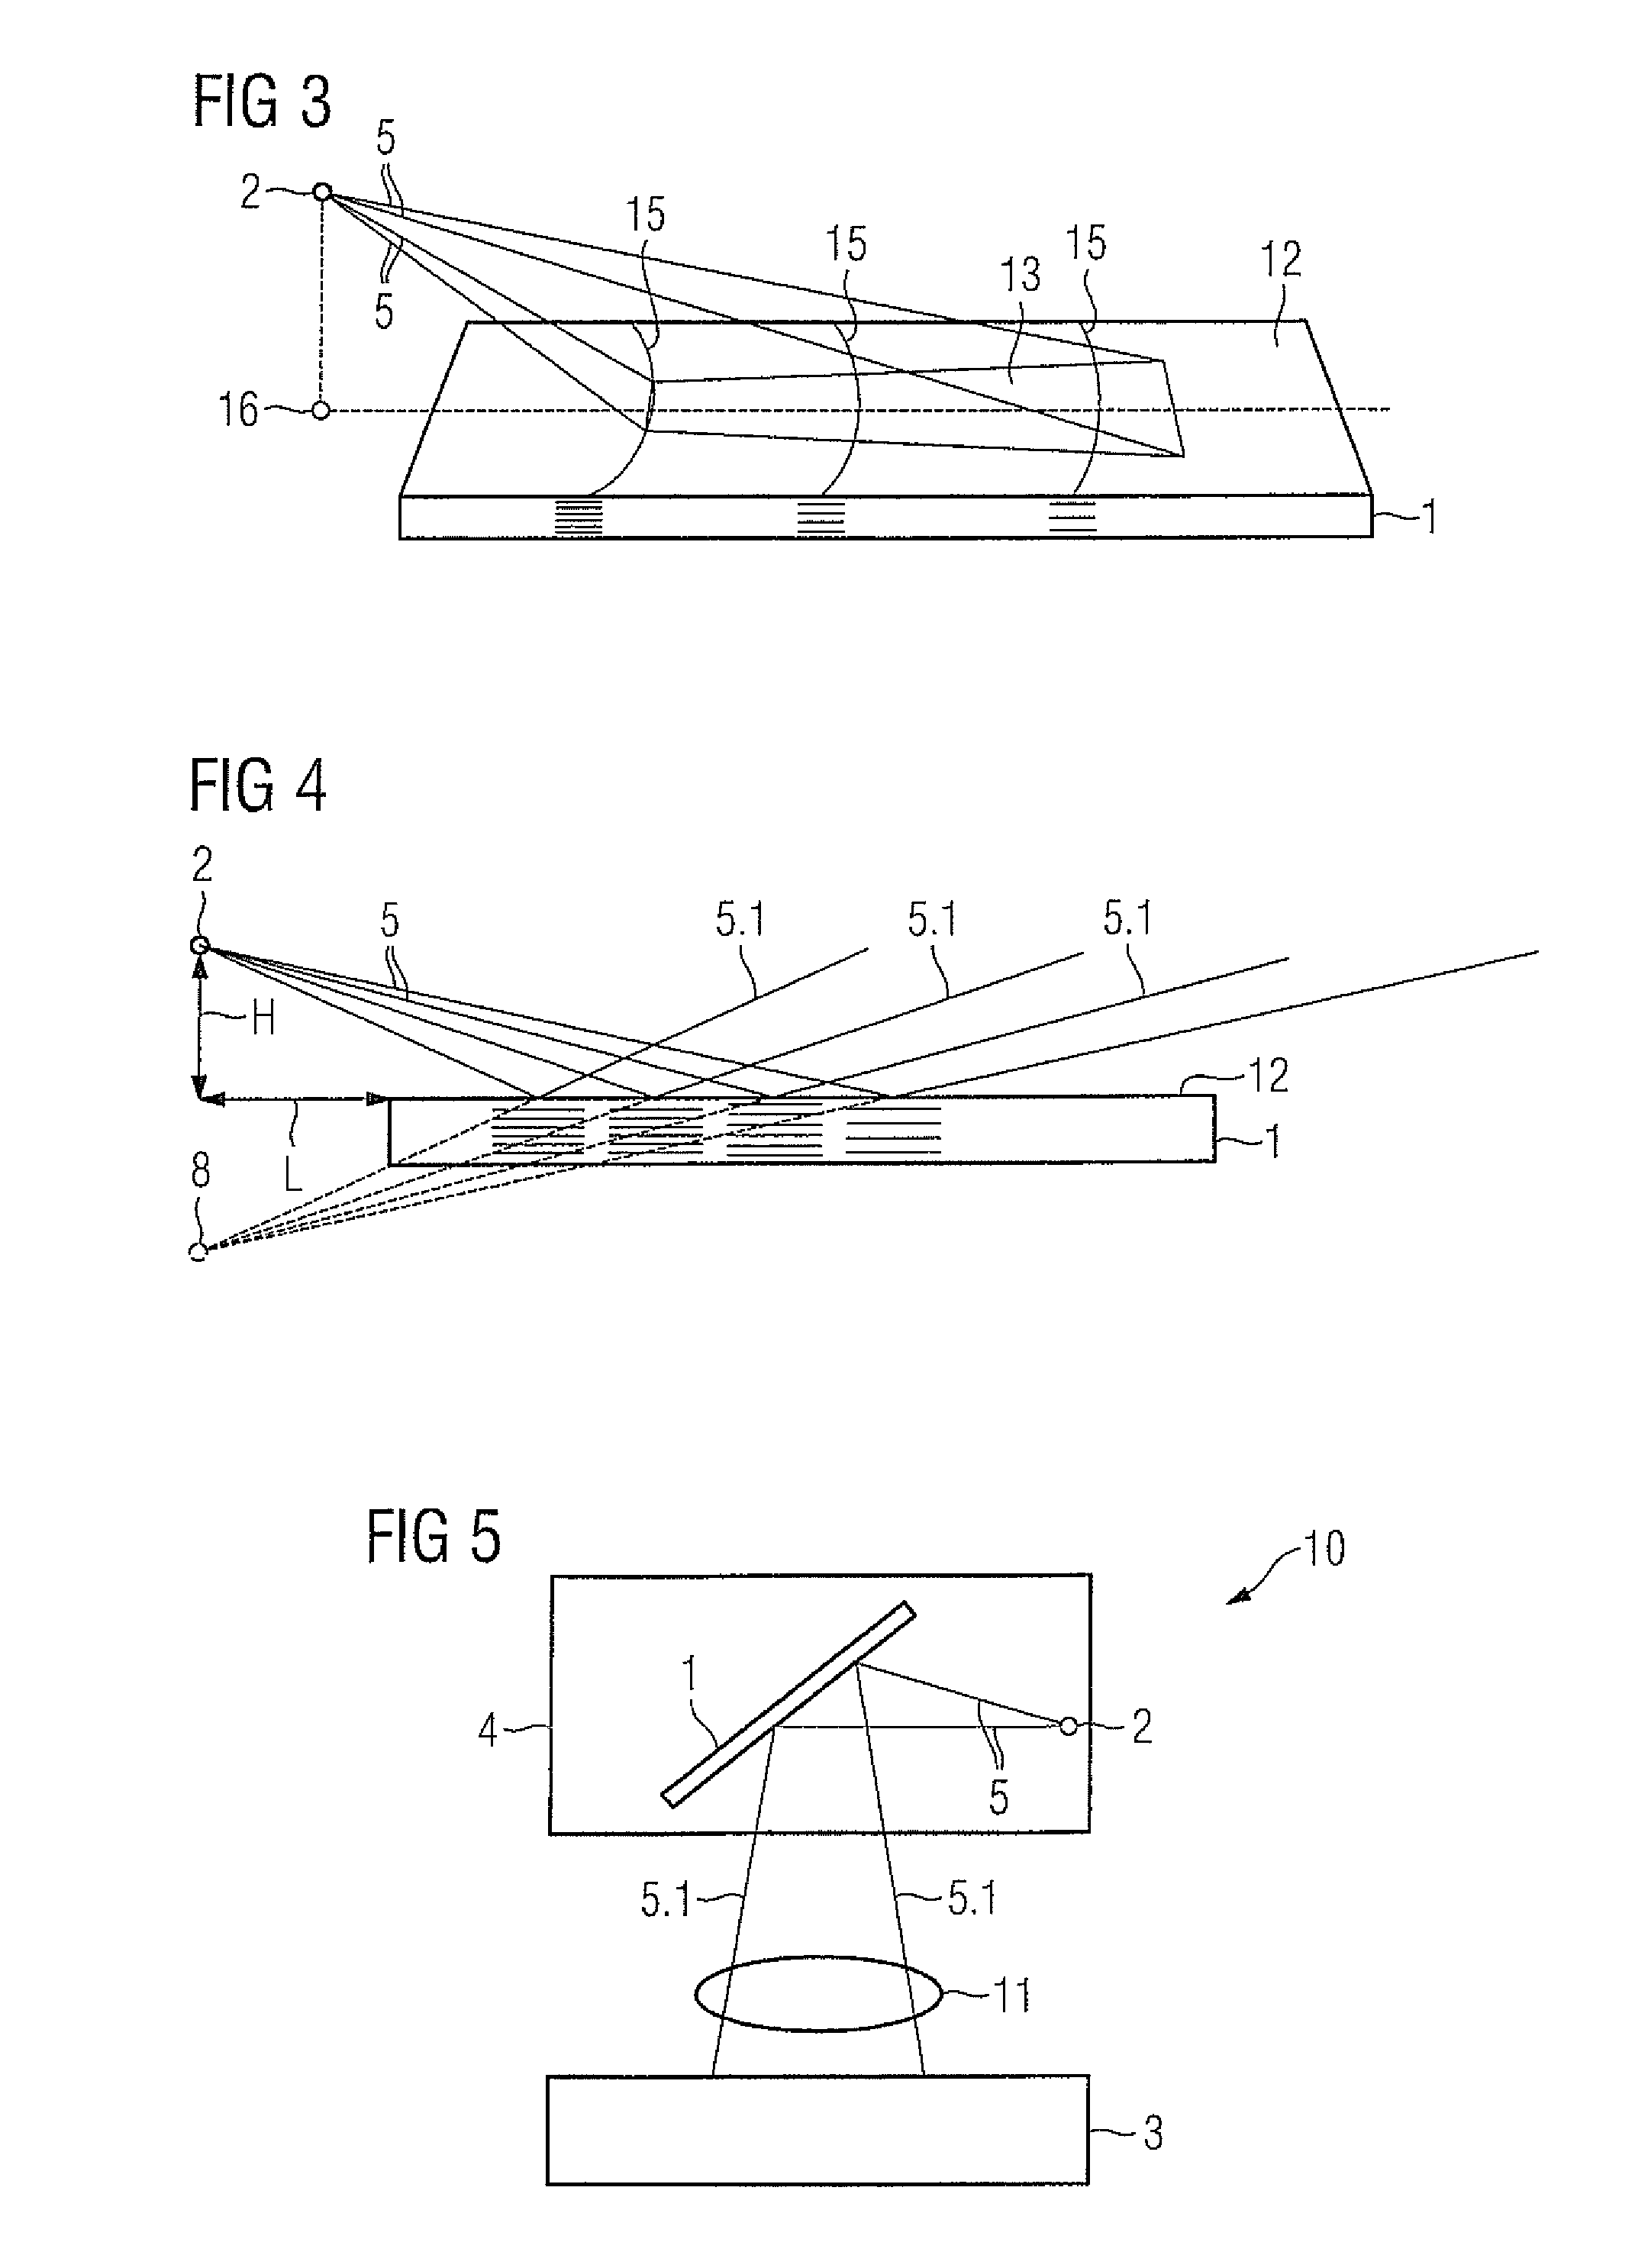 X-ray radiator to generate quasi-monochromatic x-ray radiation, and radiography x-ray acquisition system employing same